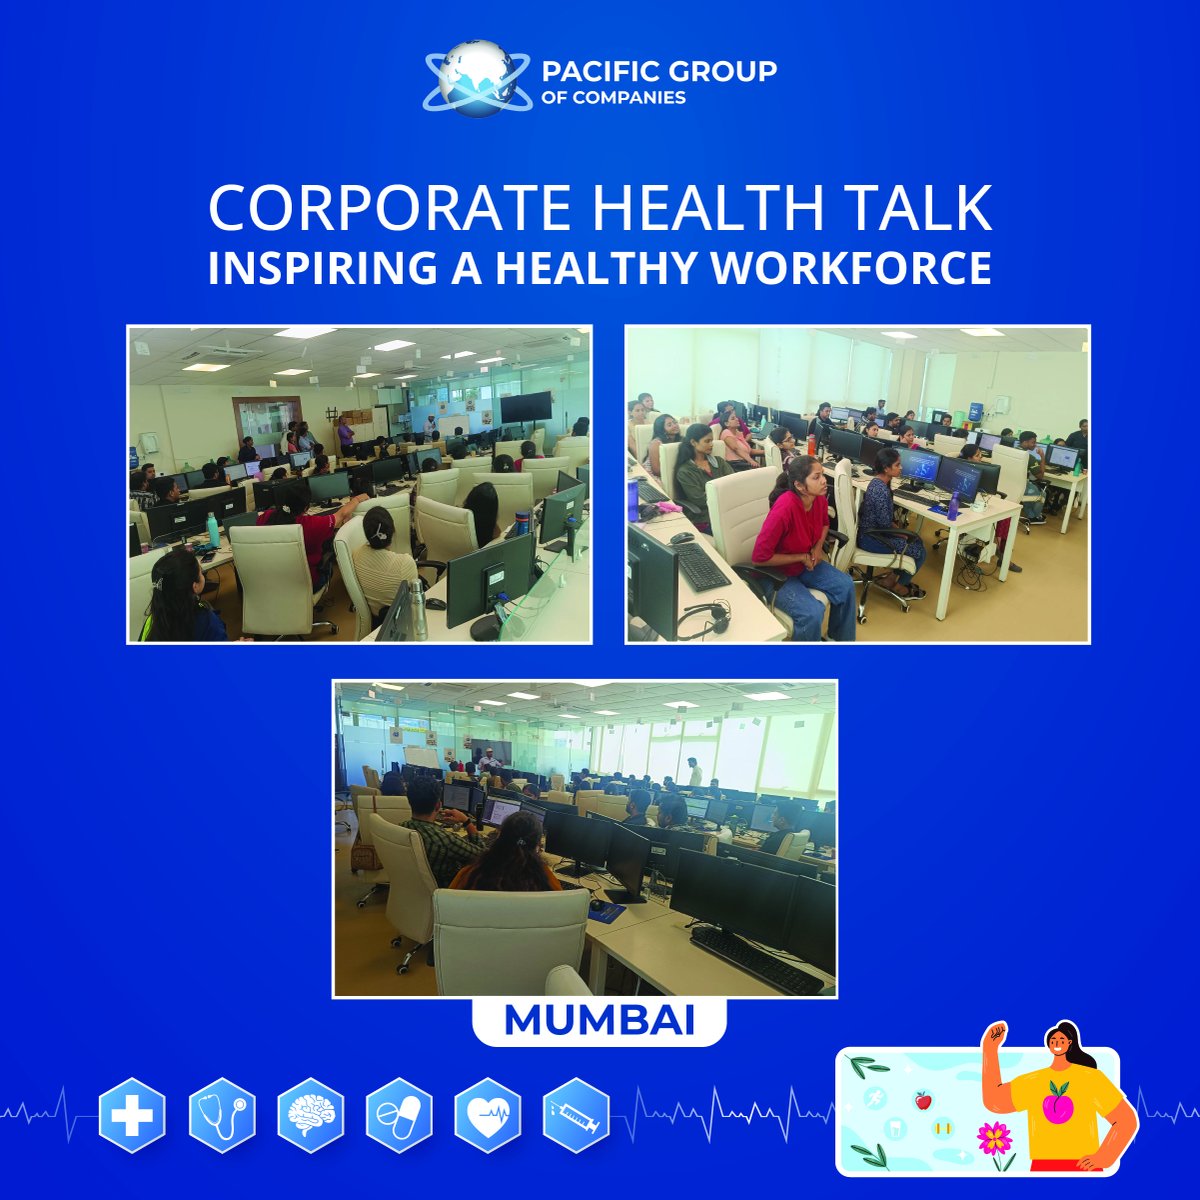 Recently we had an inspiring corporate health talk by health expert by Vaishakhi Shukla. The health talk session covered A to Z topics essential to maintain and lead a healthy life.

#CorporateHealth #EmployeeWellness #HealthyLiving #HealthTalk #WellnessProgram #HealthyHabits